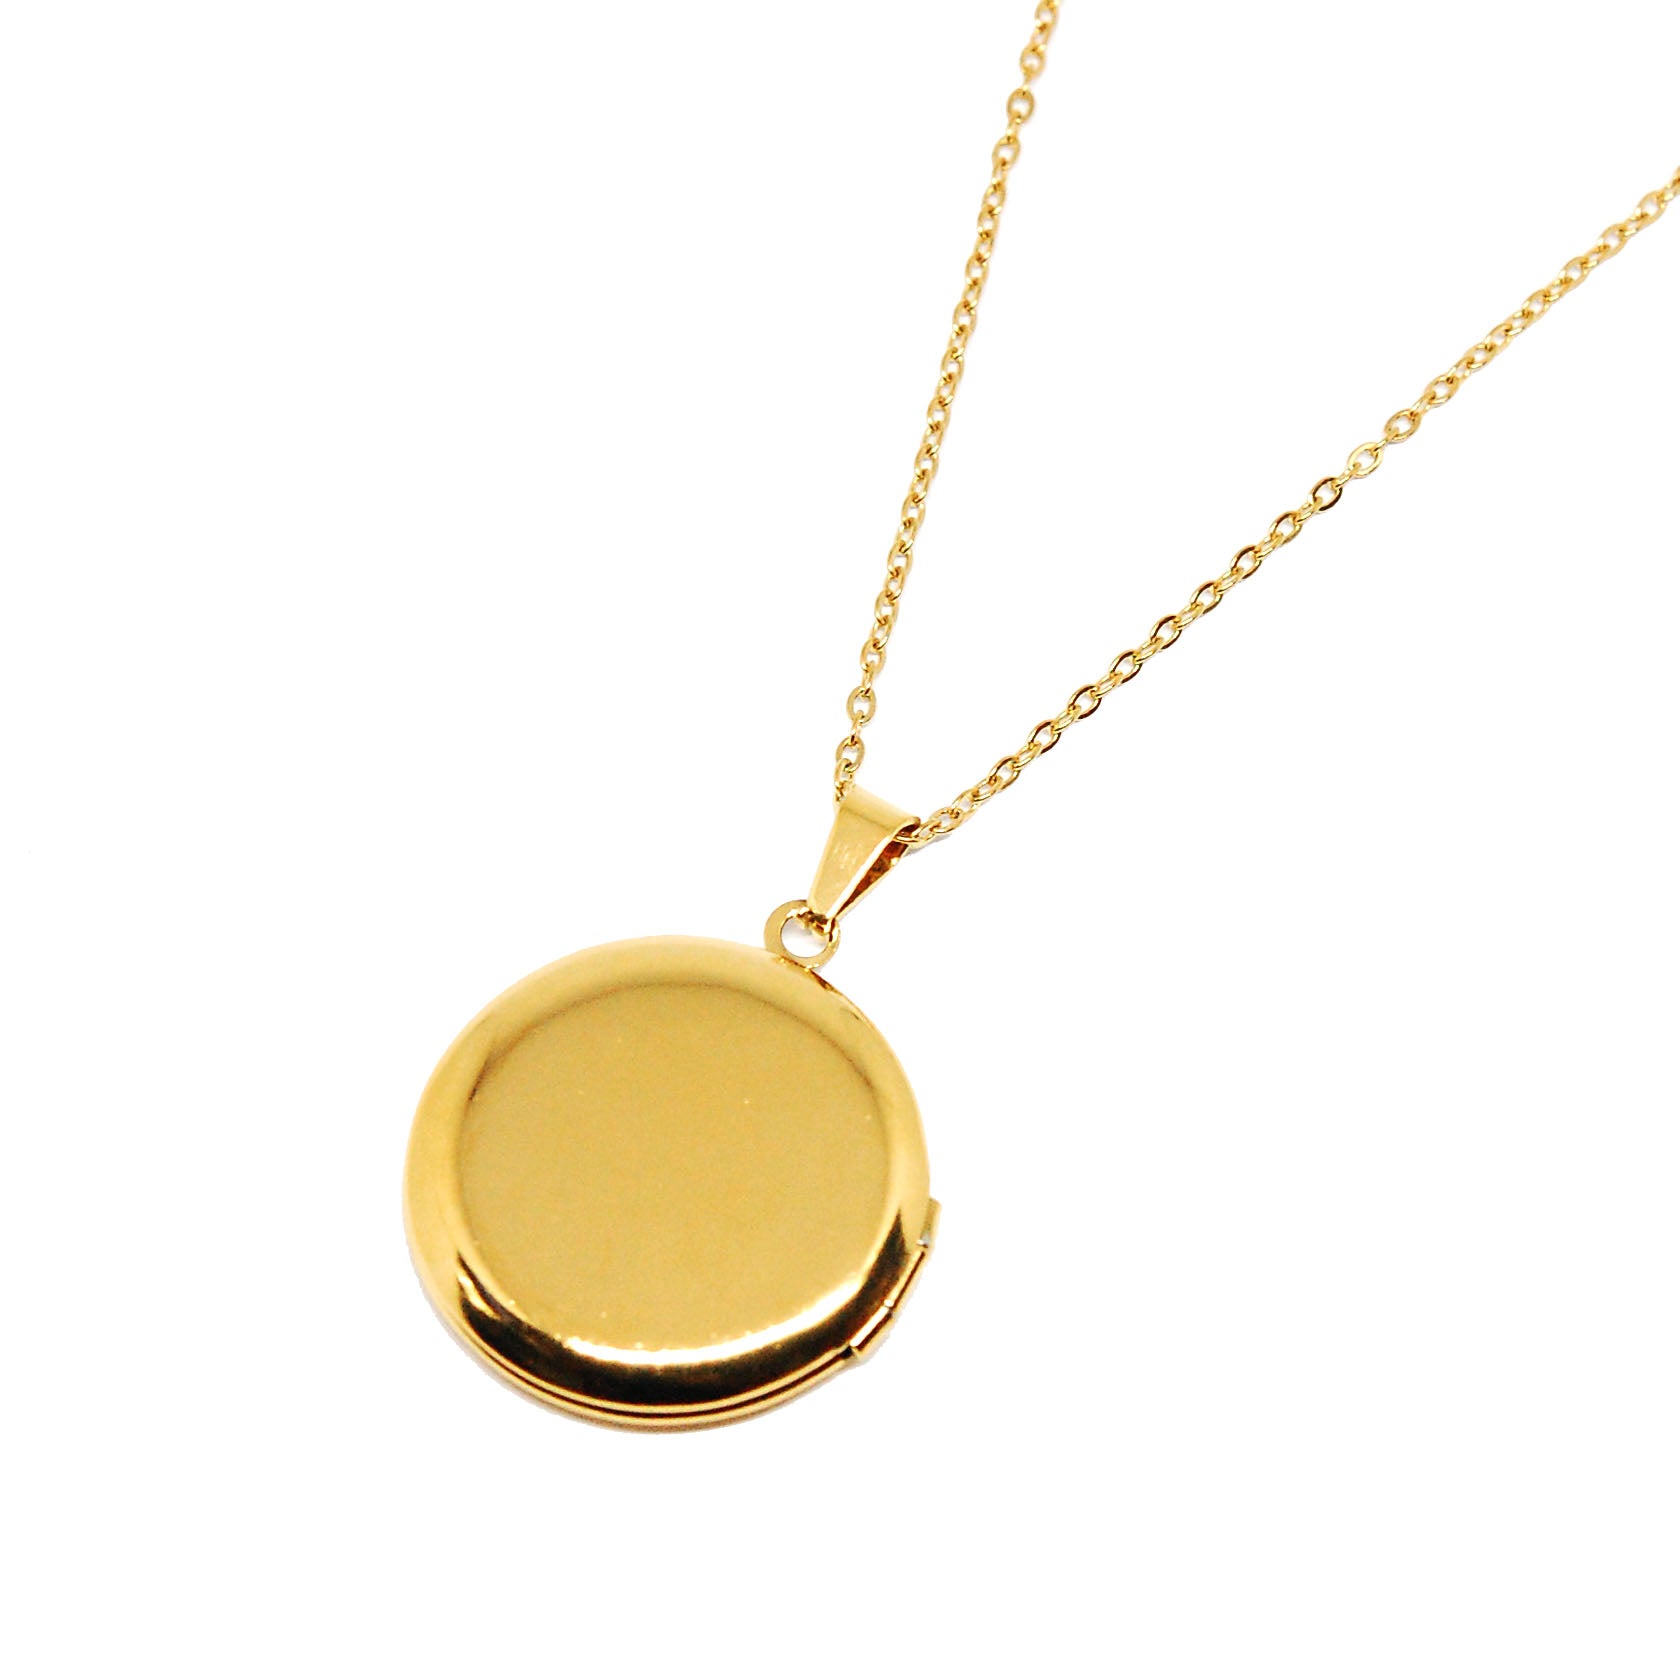 ESN 7373: Gold Plated 27mm Thin Circle Locket w/ 17" Med Link Chain (w/ Free Face Engrave)